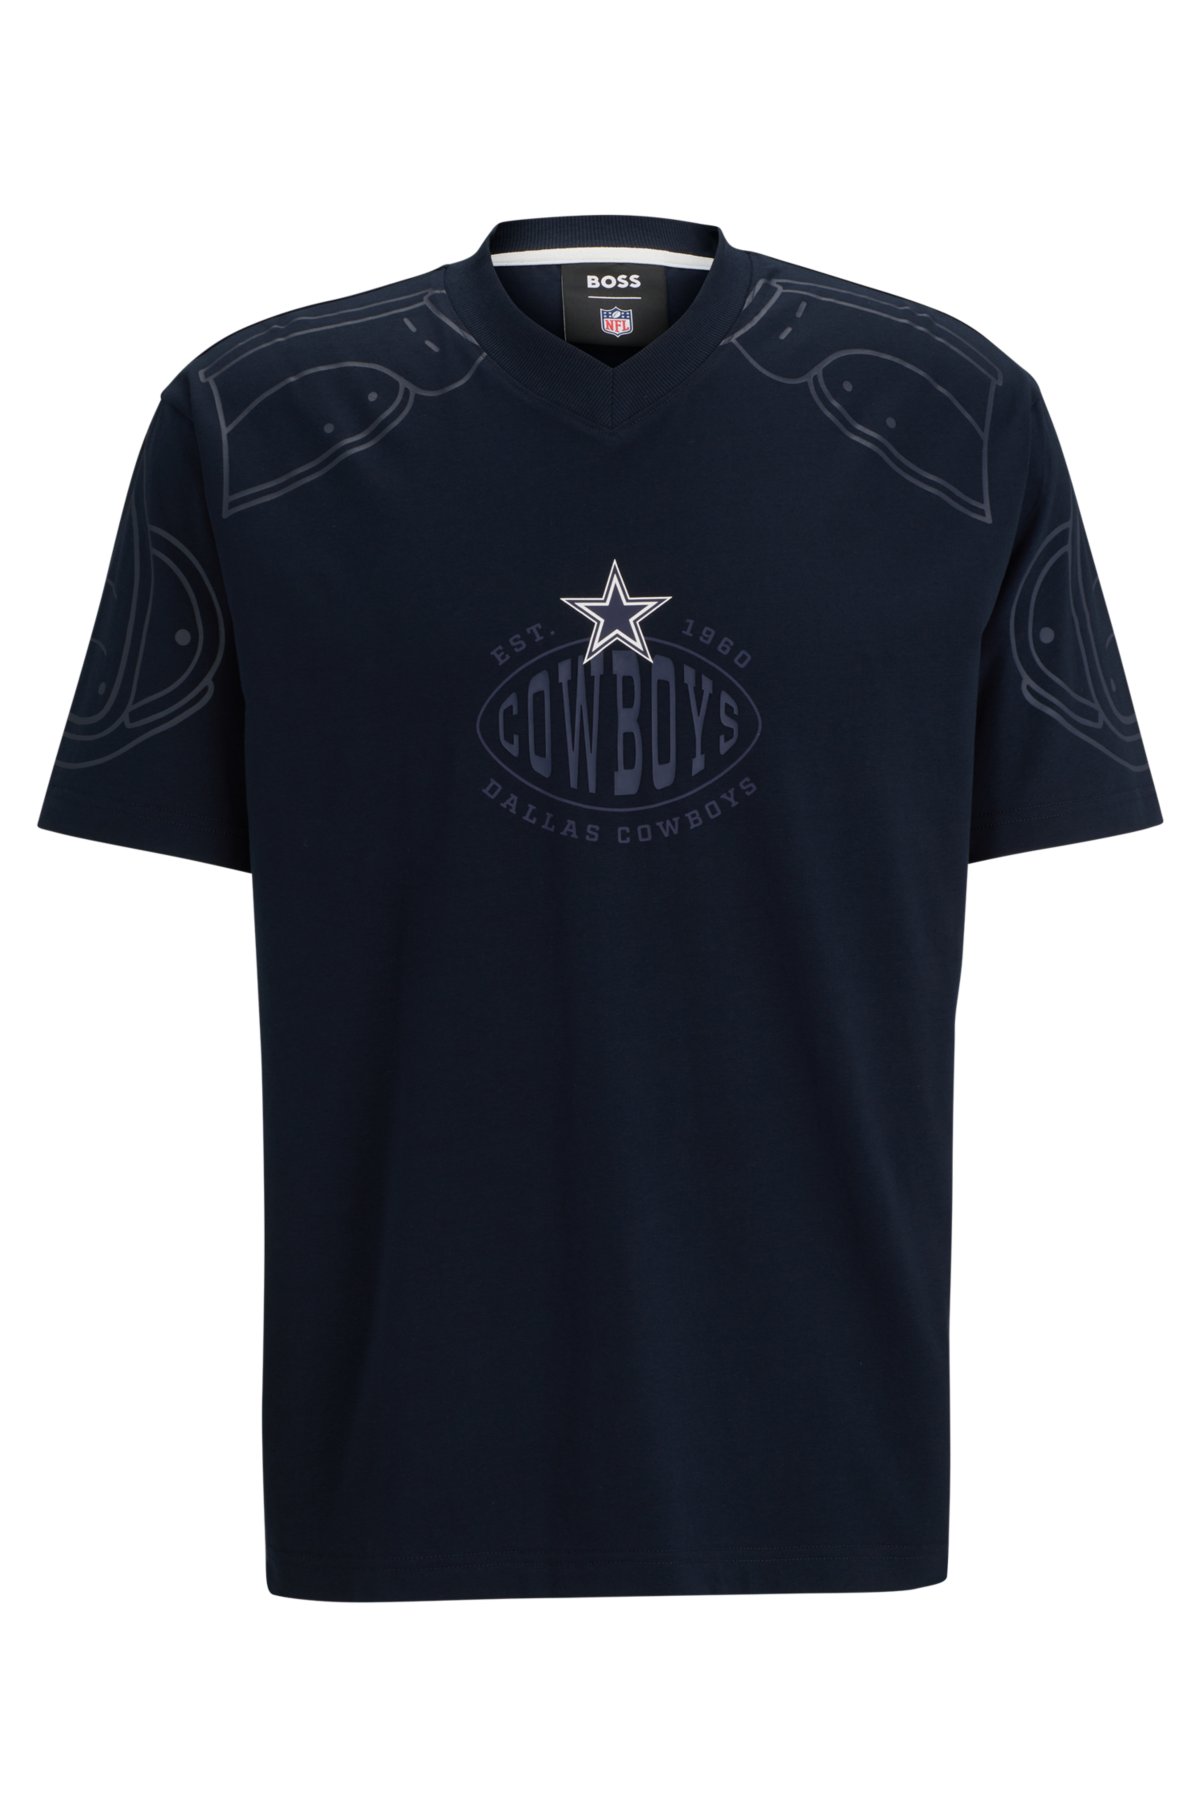 BOSS x NFL oversize-fit T-shirt with collaborative branding, Cowboys